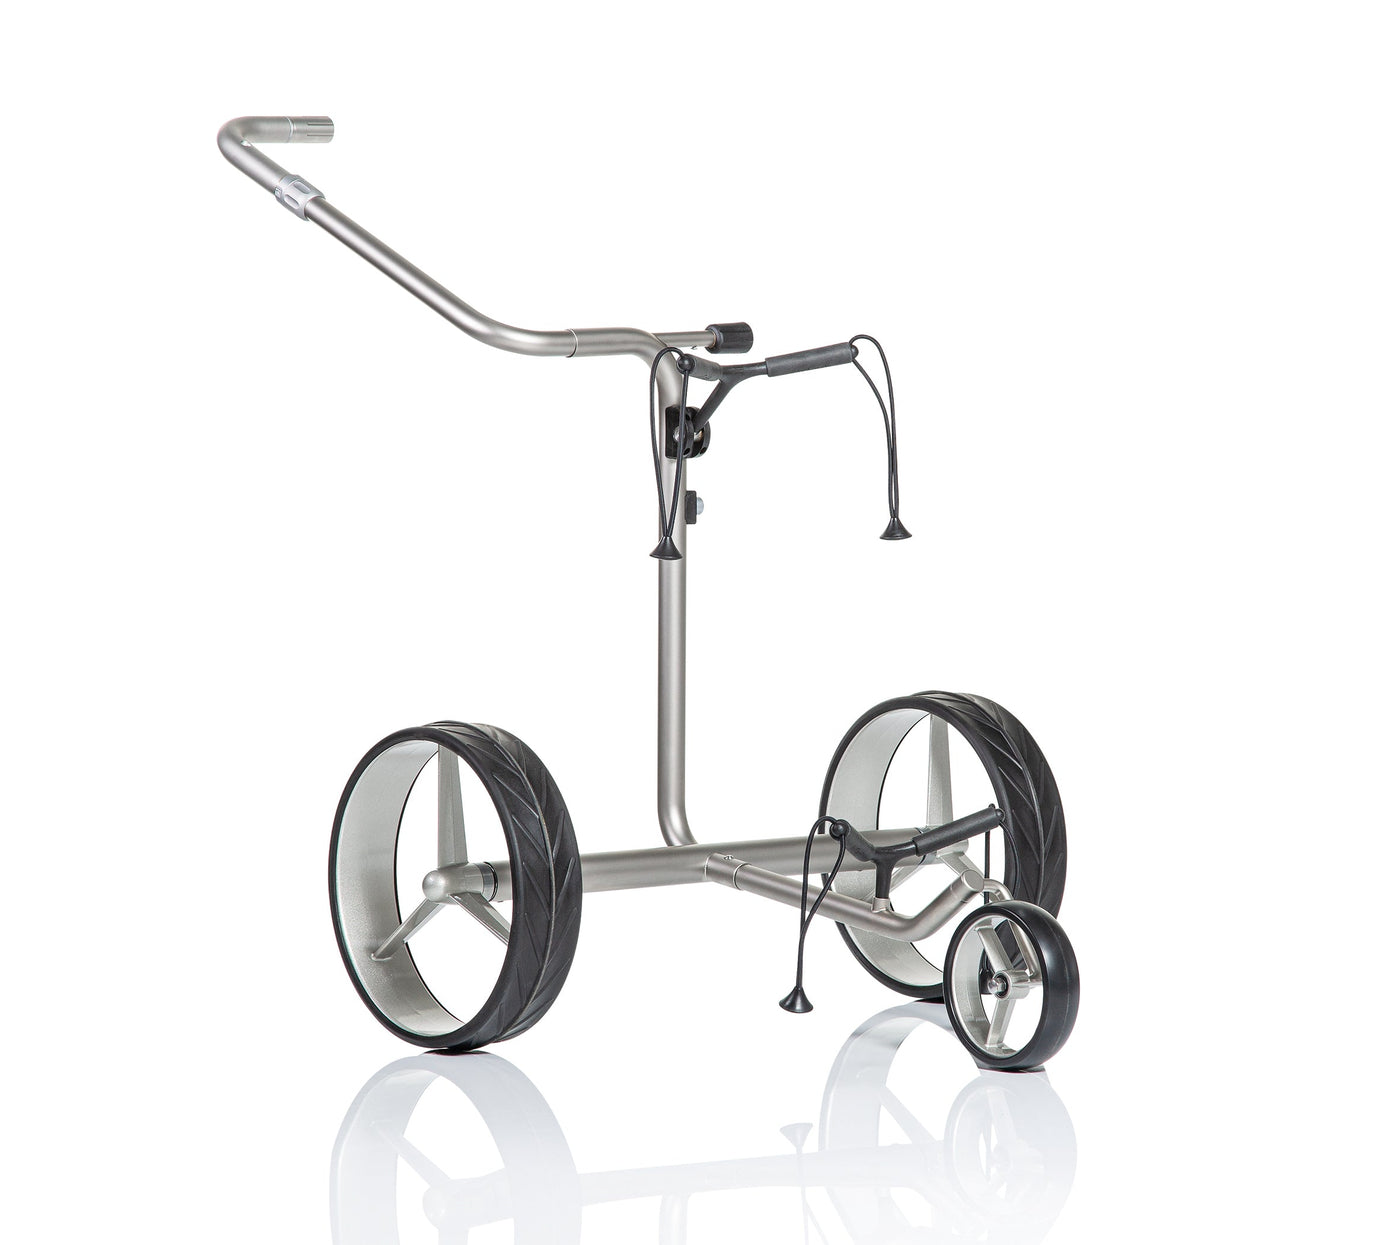 JuCad golf trolley junior stainless steel 3 wheels - for our youngest golfers